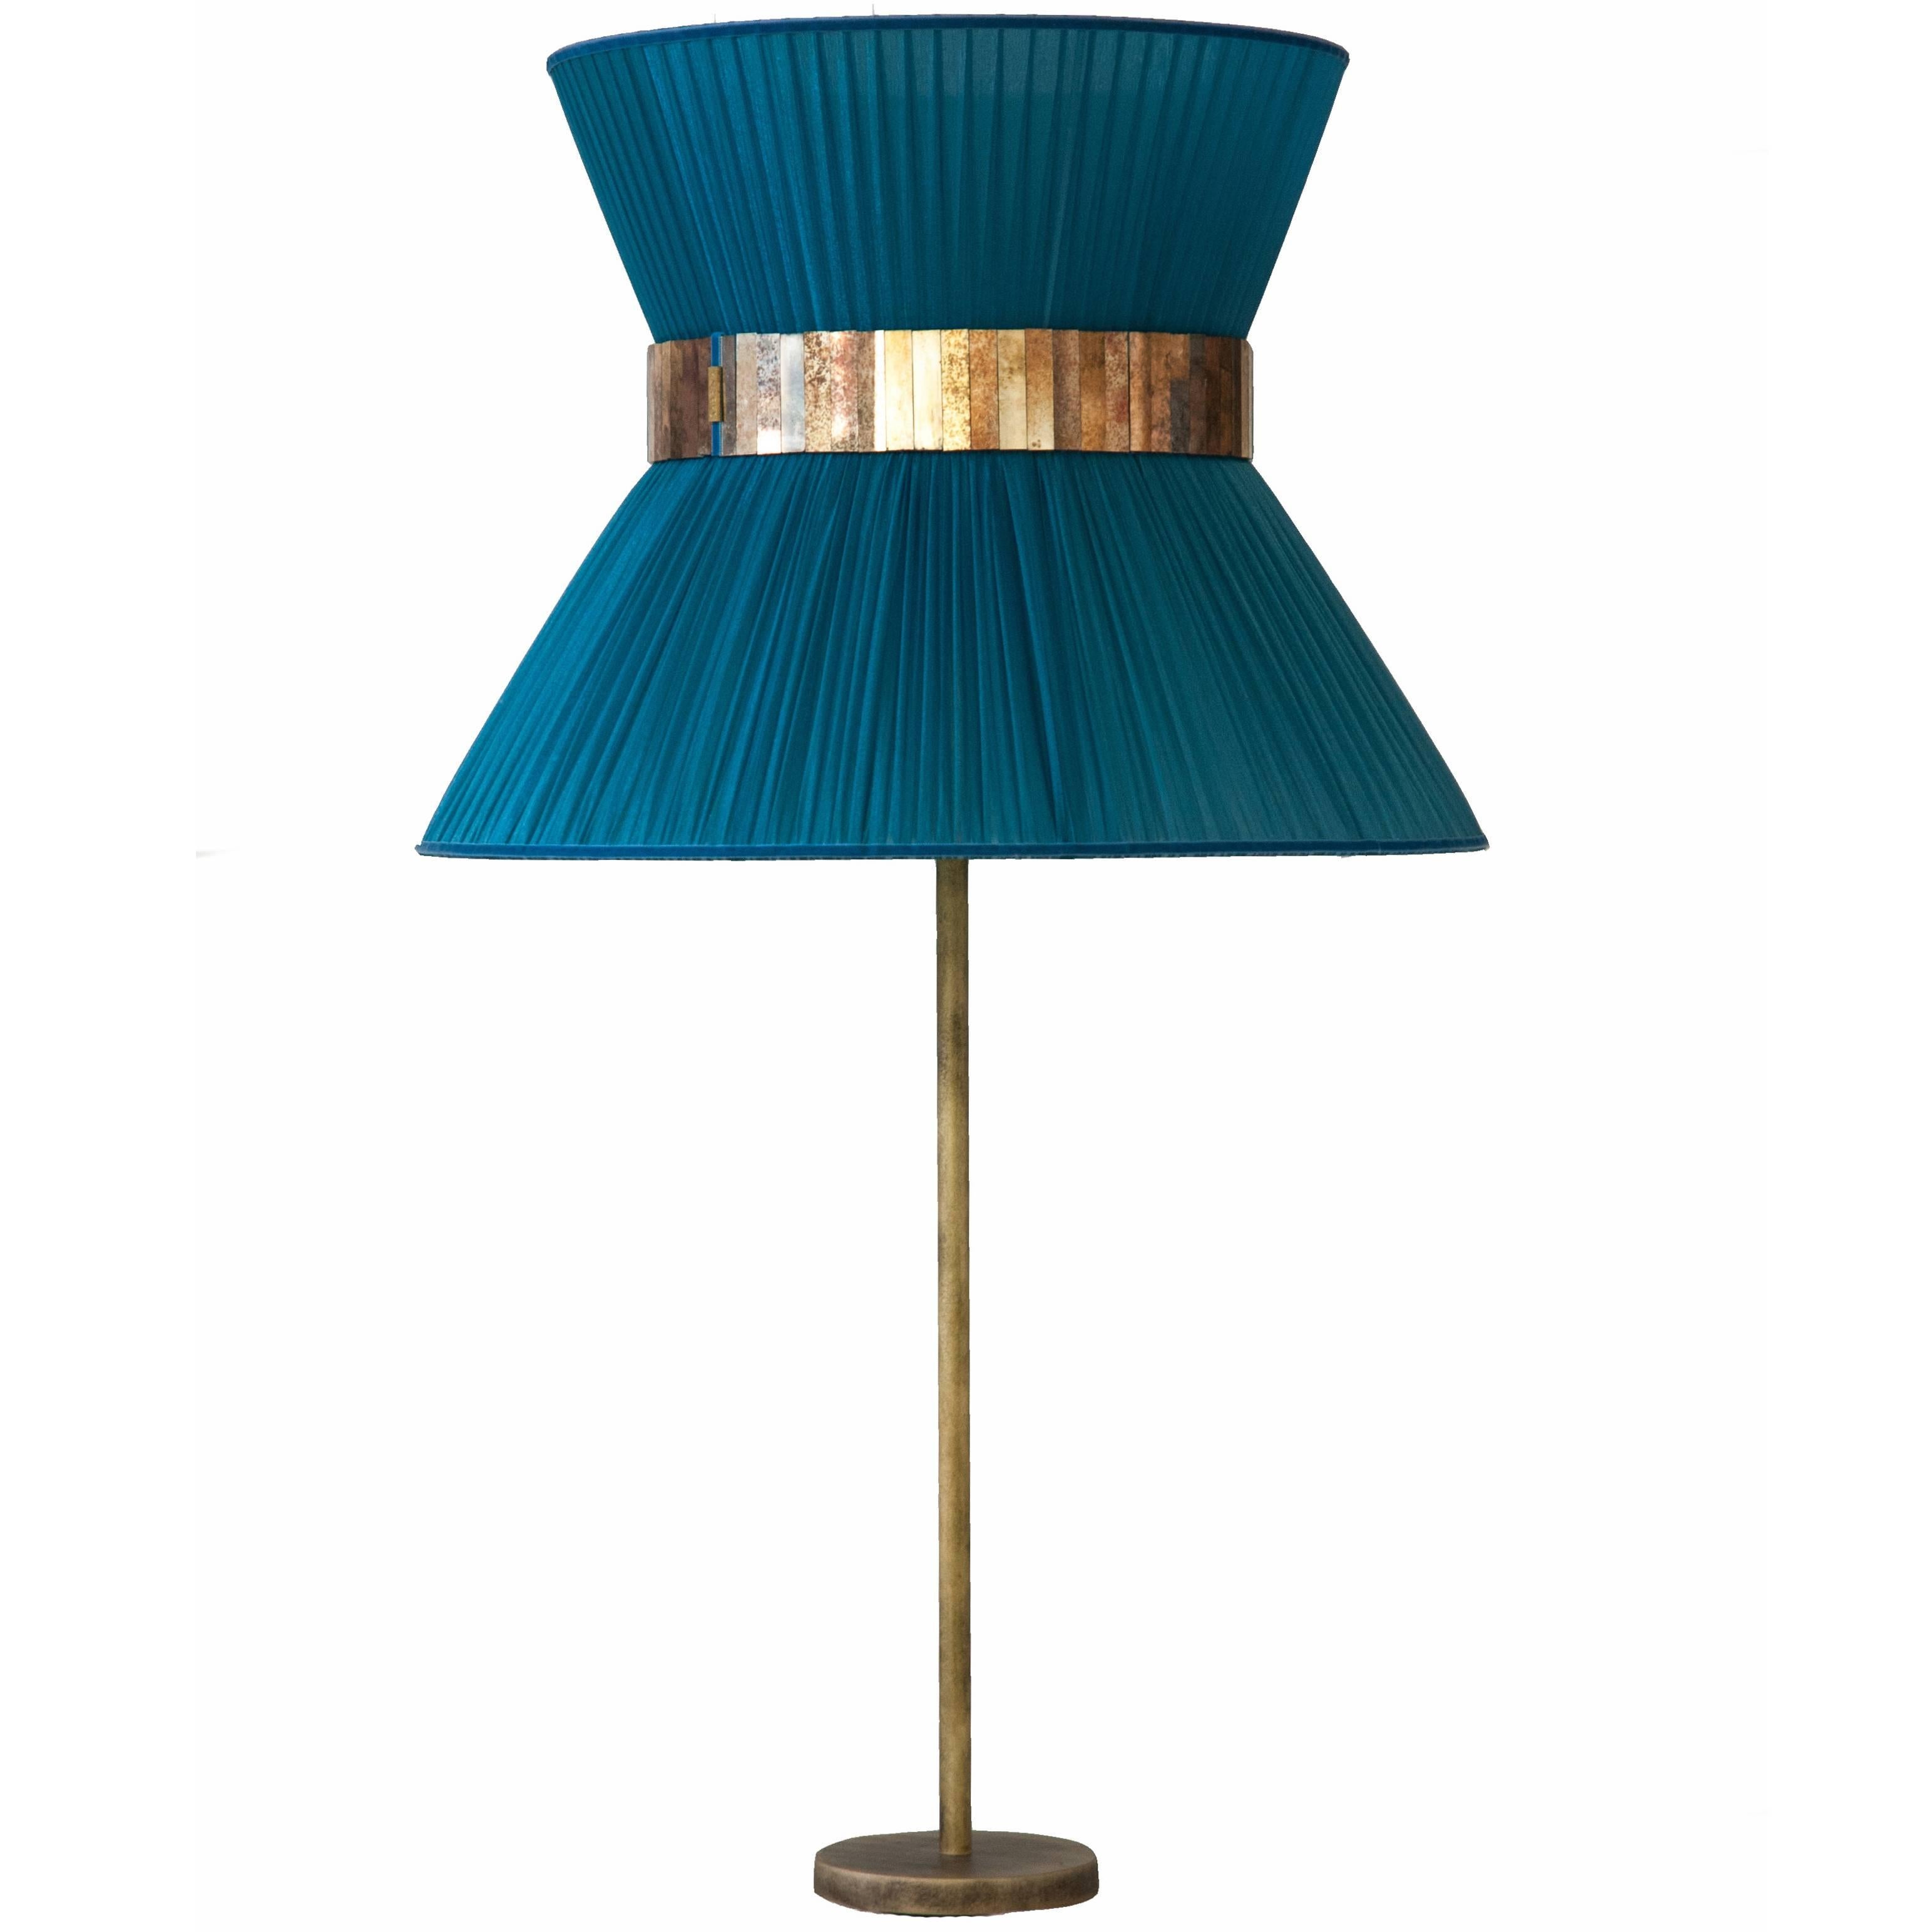  “Tiffany” Table Lamp in Teal Silk, Antiqued Brass, Silvered Glass Handmade 